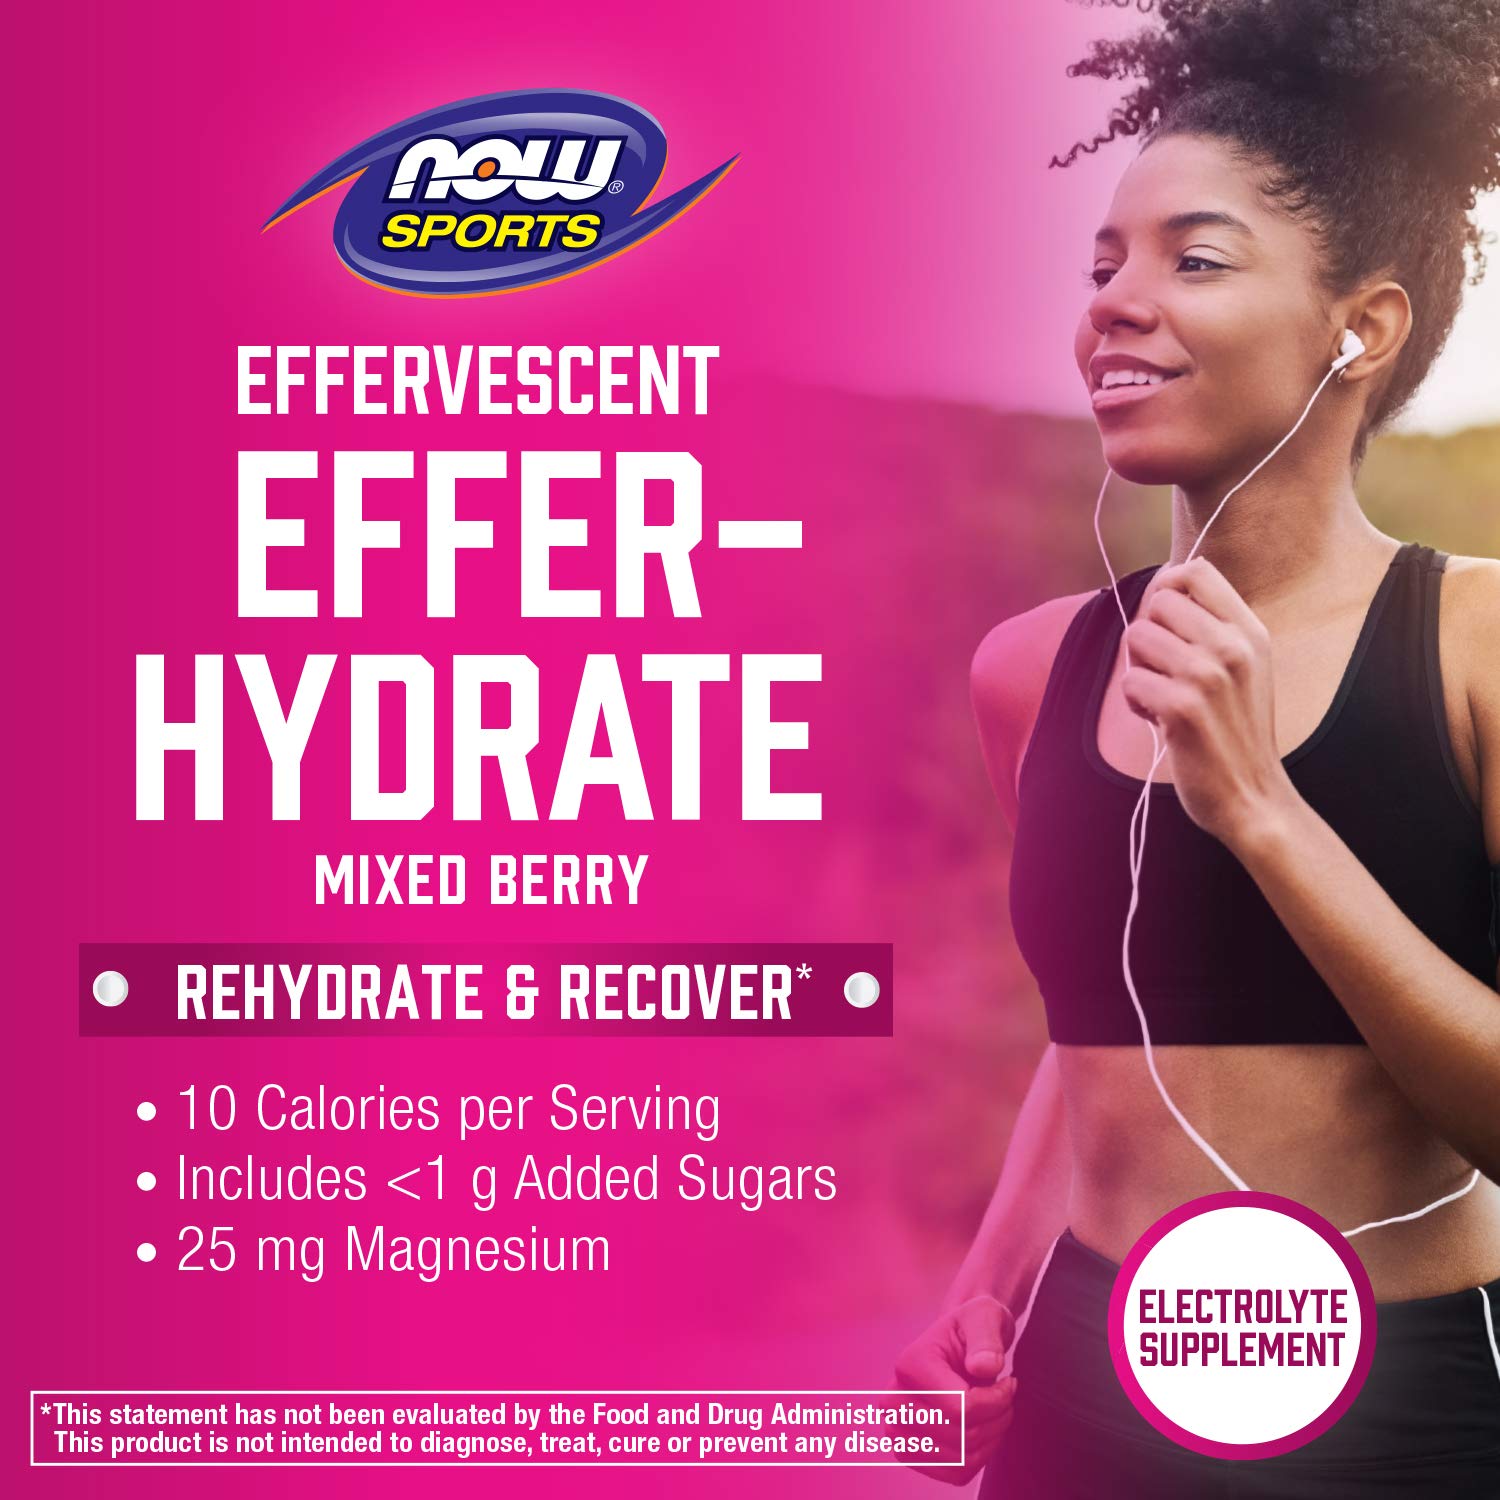 NOW Sports Nutrition, Effervescent Effer-Hydrate, Electrolyte Supplement, Recovery*, Mixed Berry, 10 Tablets